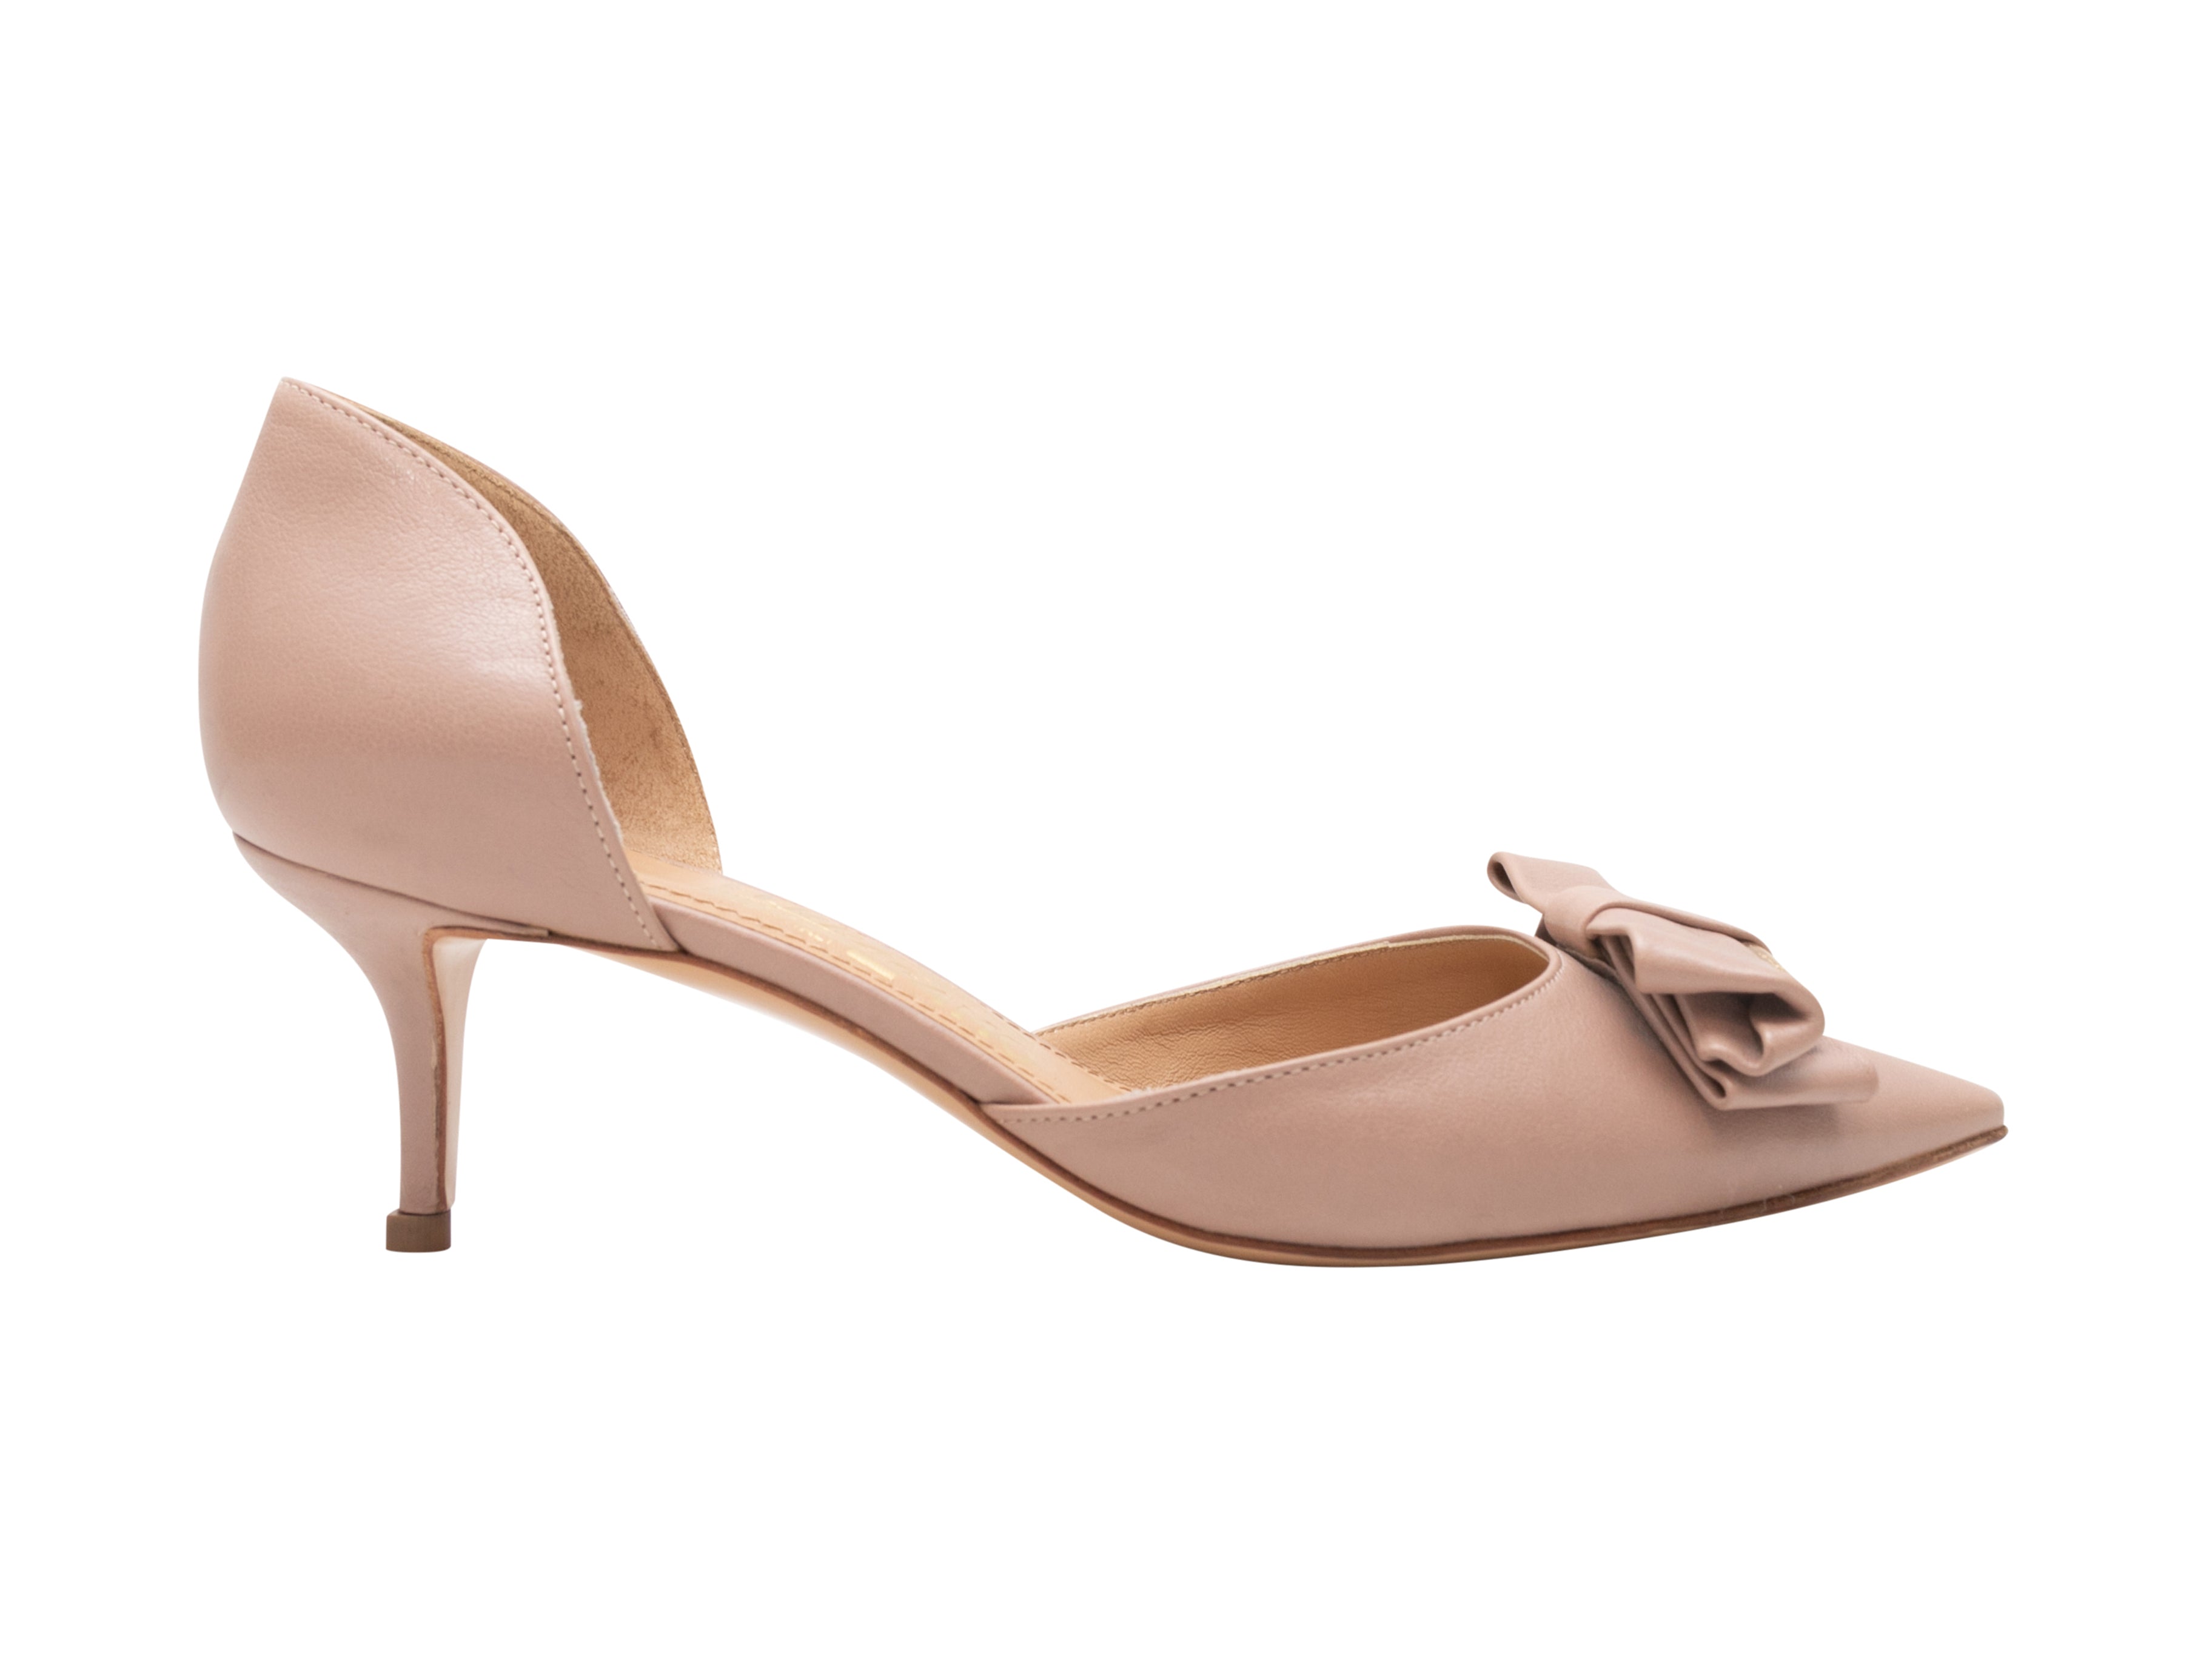 Blush Pointed-Toe D' Pumps Size 37.5